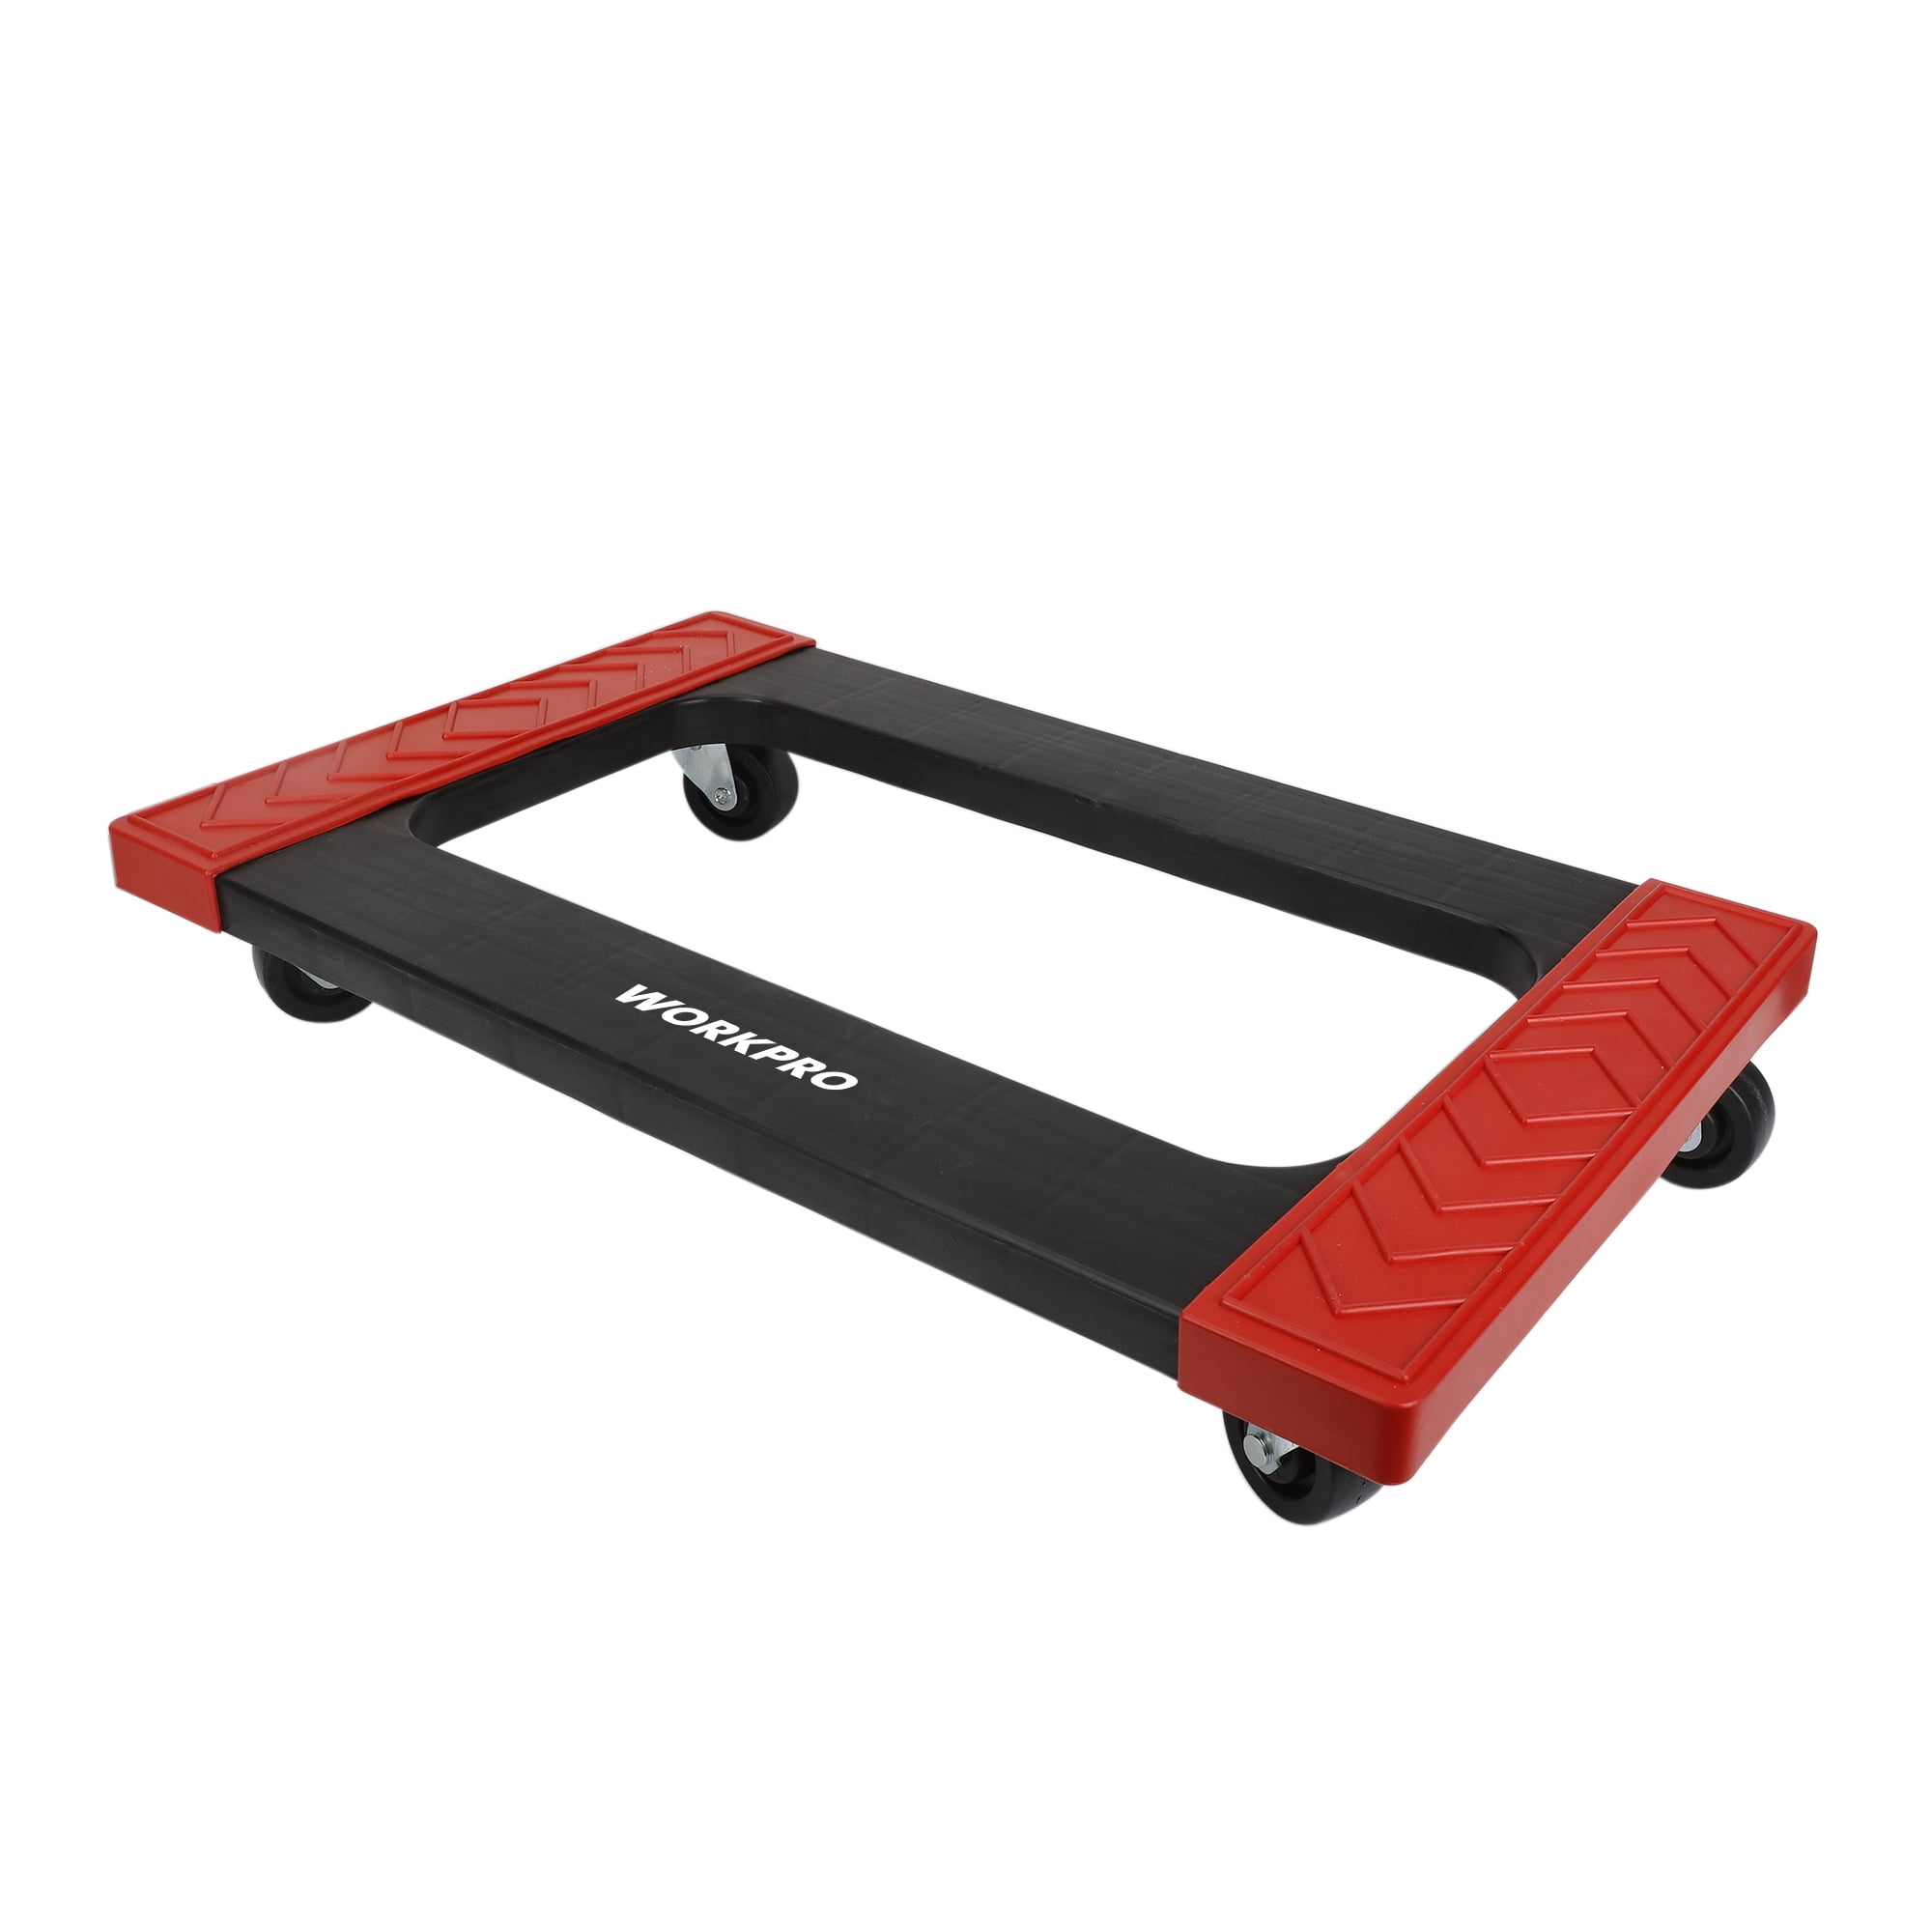 30” WORKPRO Plastic Moving Dolly (800-lb Capacity) $19.98 + Free S&H w/ Walmart+ or $35+